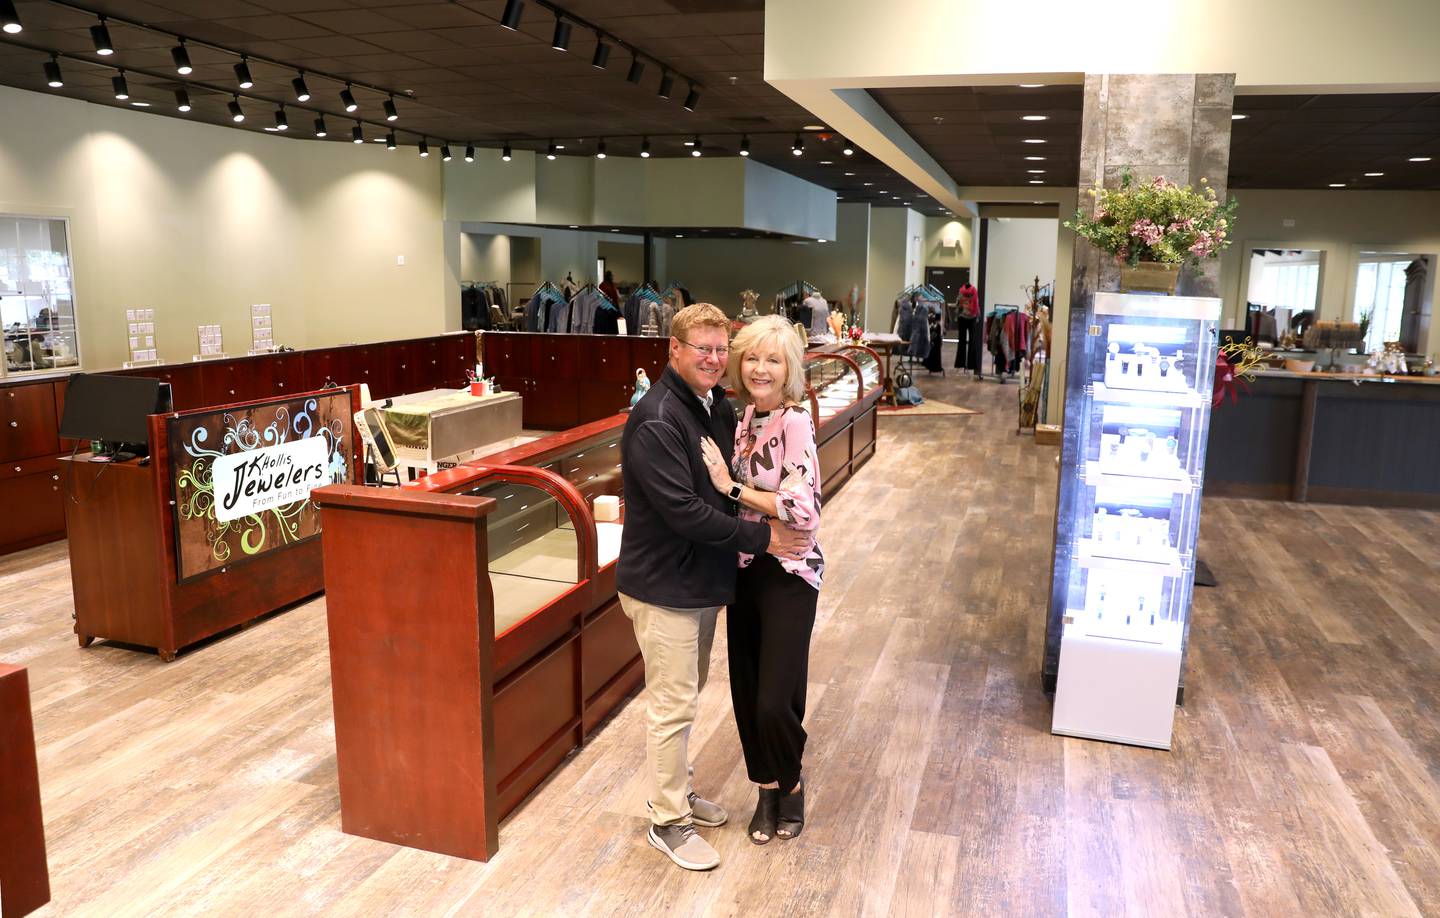 K. Hollis Jewelers owners Karen and Rob Hollis have expanded in the former Pal Joey's restaurant location on Randall Road in Batavia. The store had been located across the street in the Shoppes At Windmill Place shopping center since 2005. The new and bigger location will feature a women's boutique along with an expanded wine bar and event space.